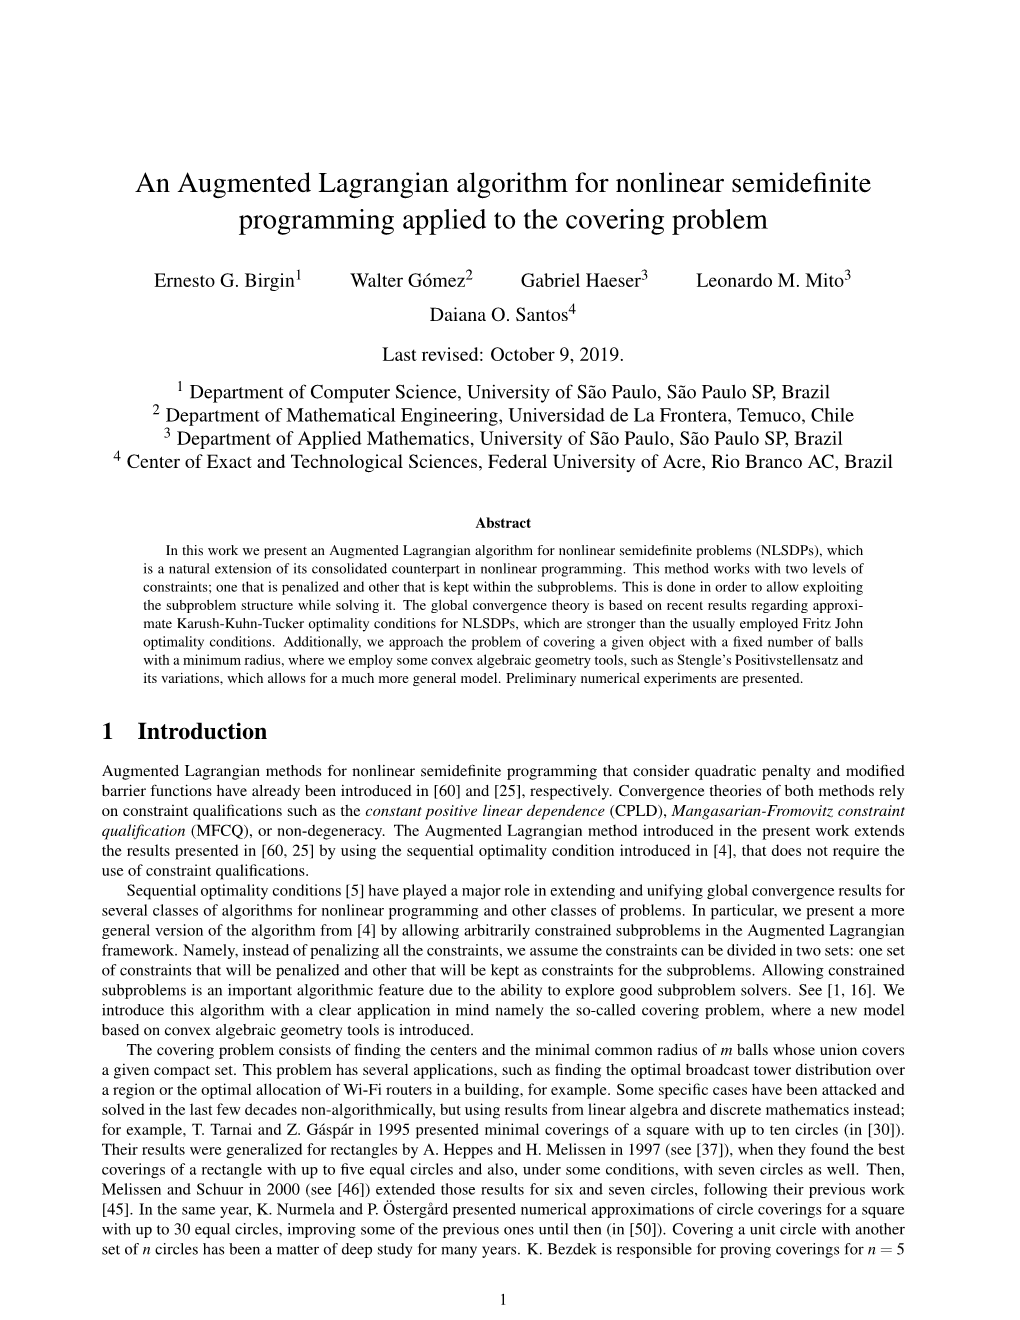 An Augmented Lagrangian Algorithm for Nonlinear Semidefinite Programming Applied to the Covering Problem